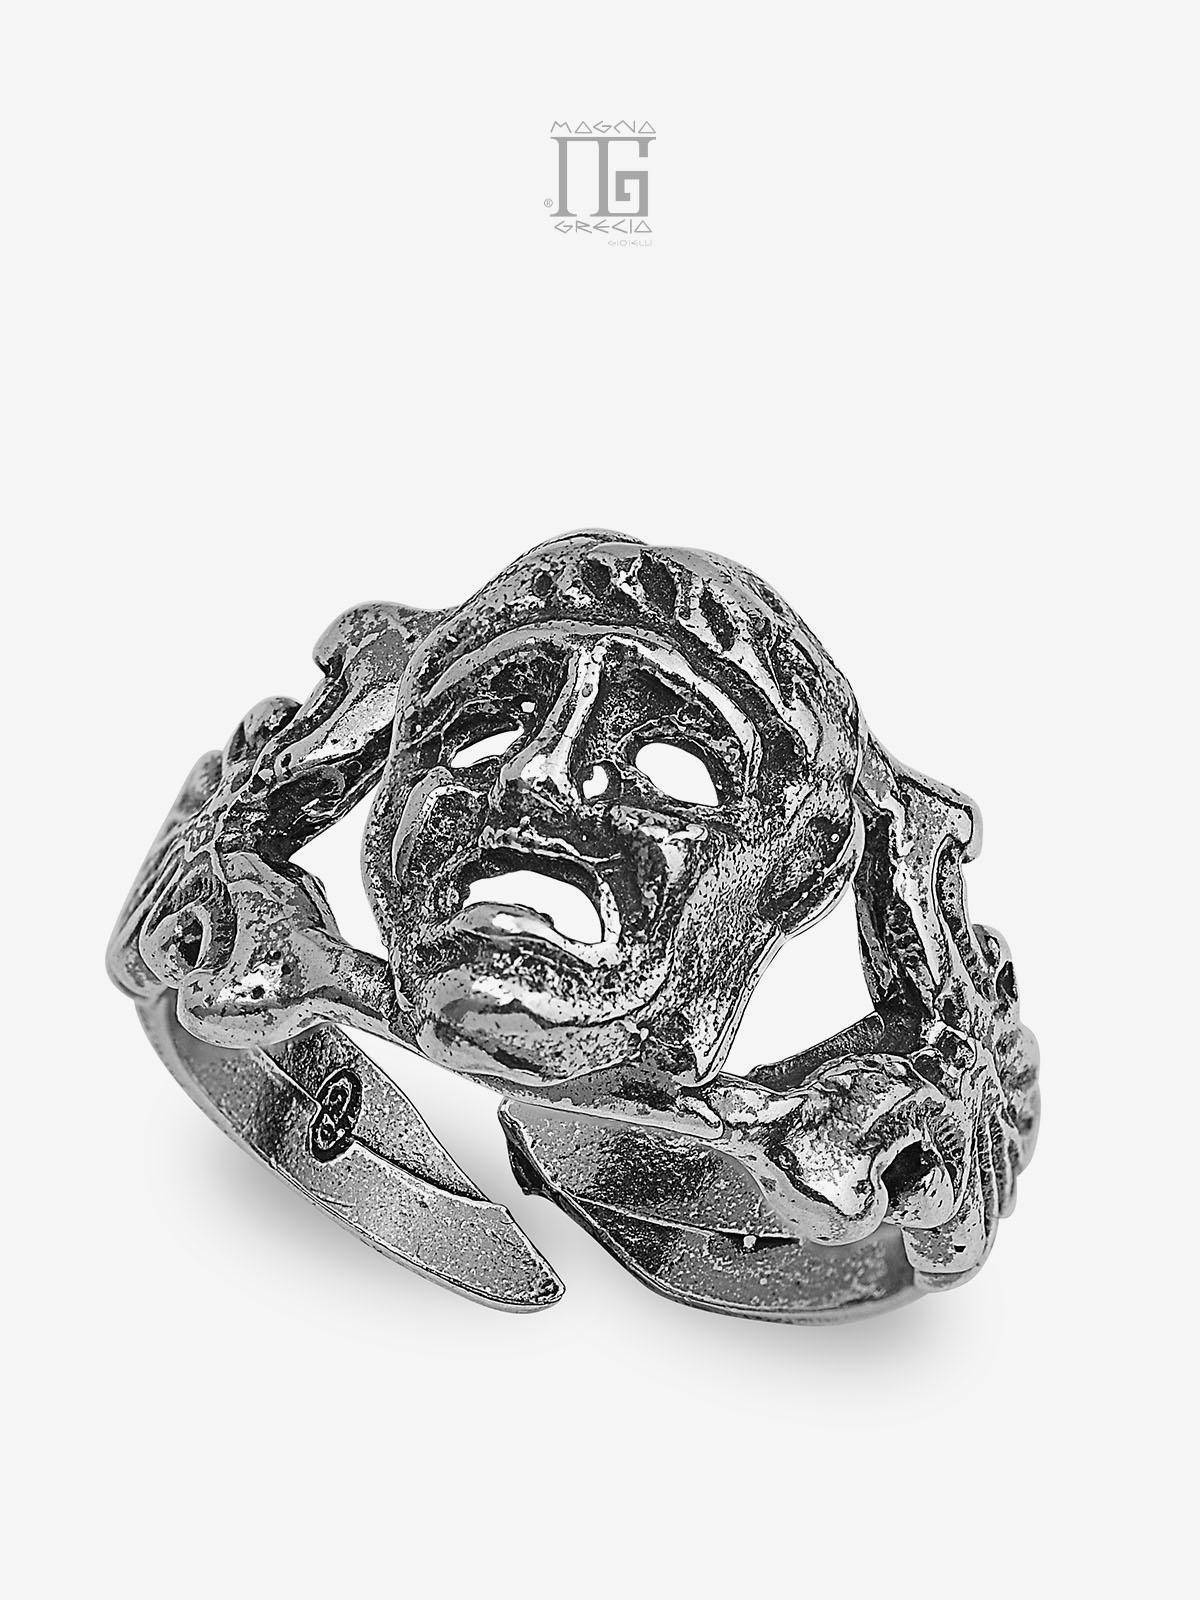 Silver Ring with Apotropaic Mask Code MGK 3737 V